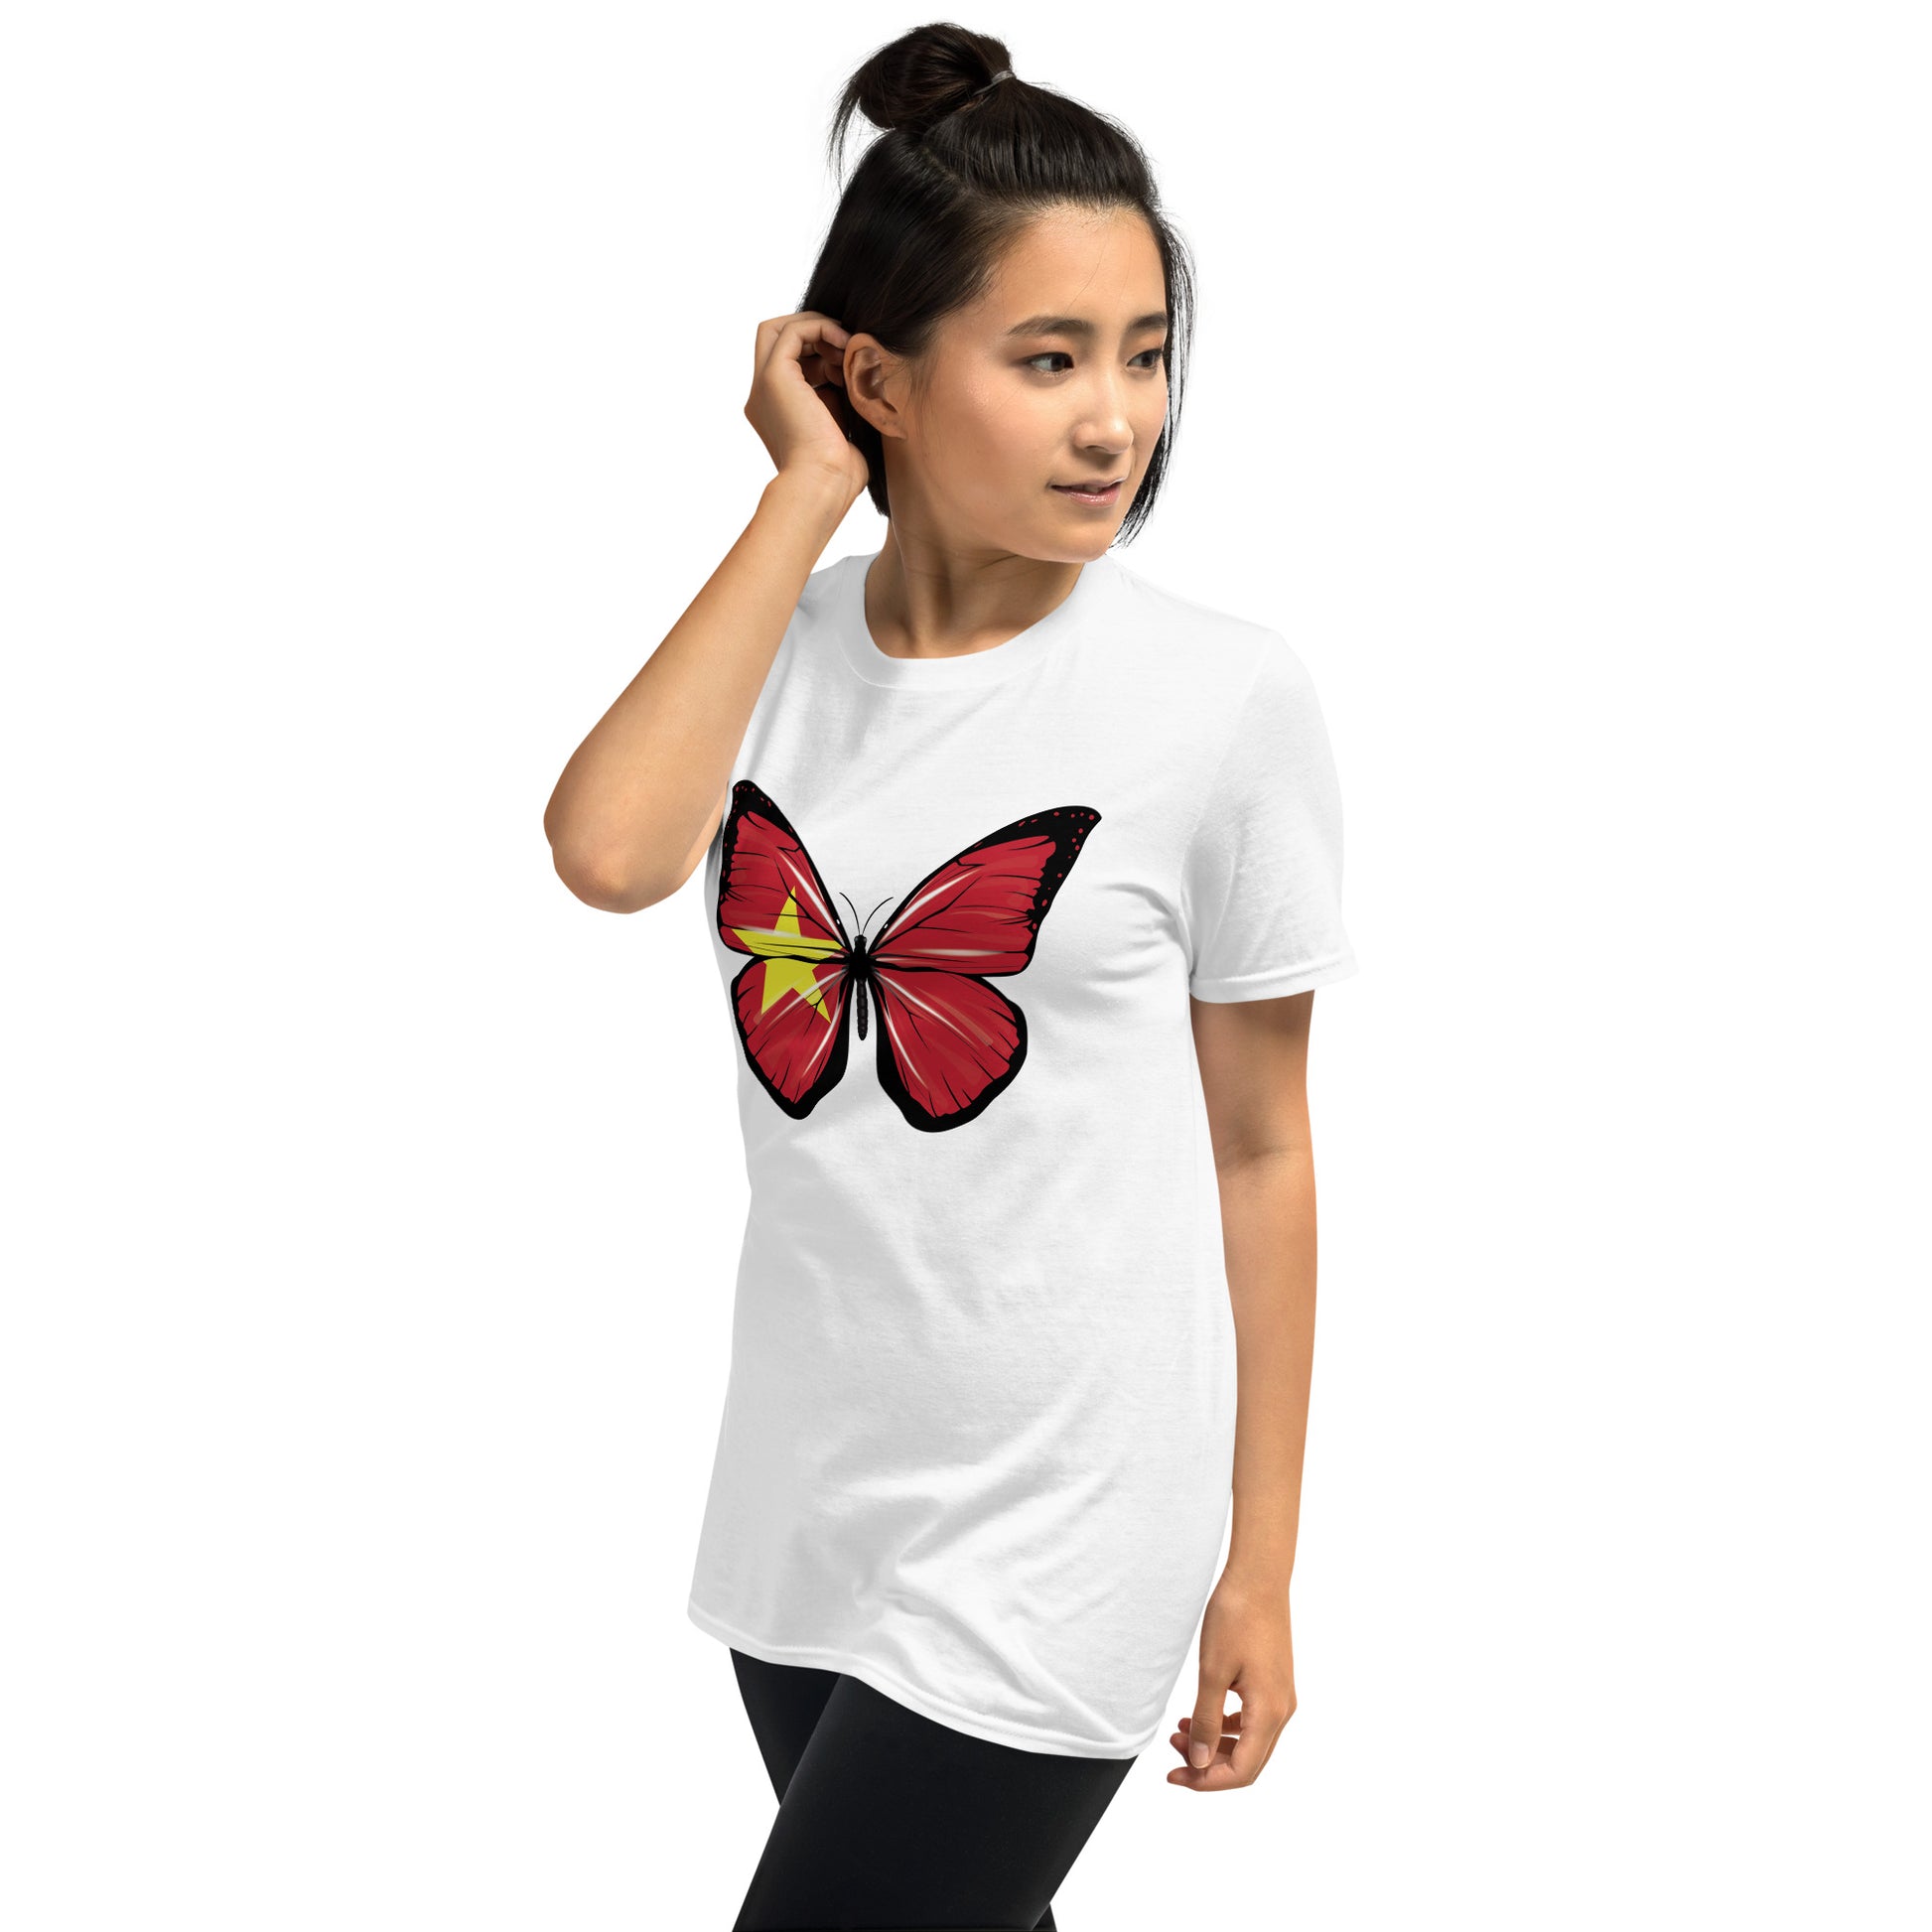 Butterfly print t-shirt inspired by Vietnam